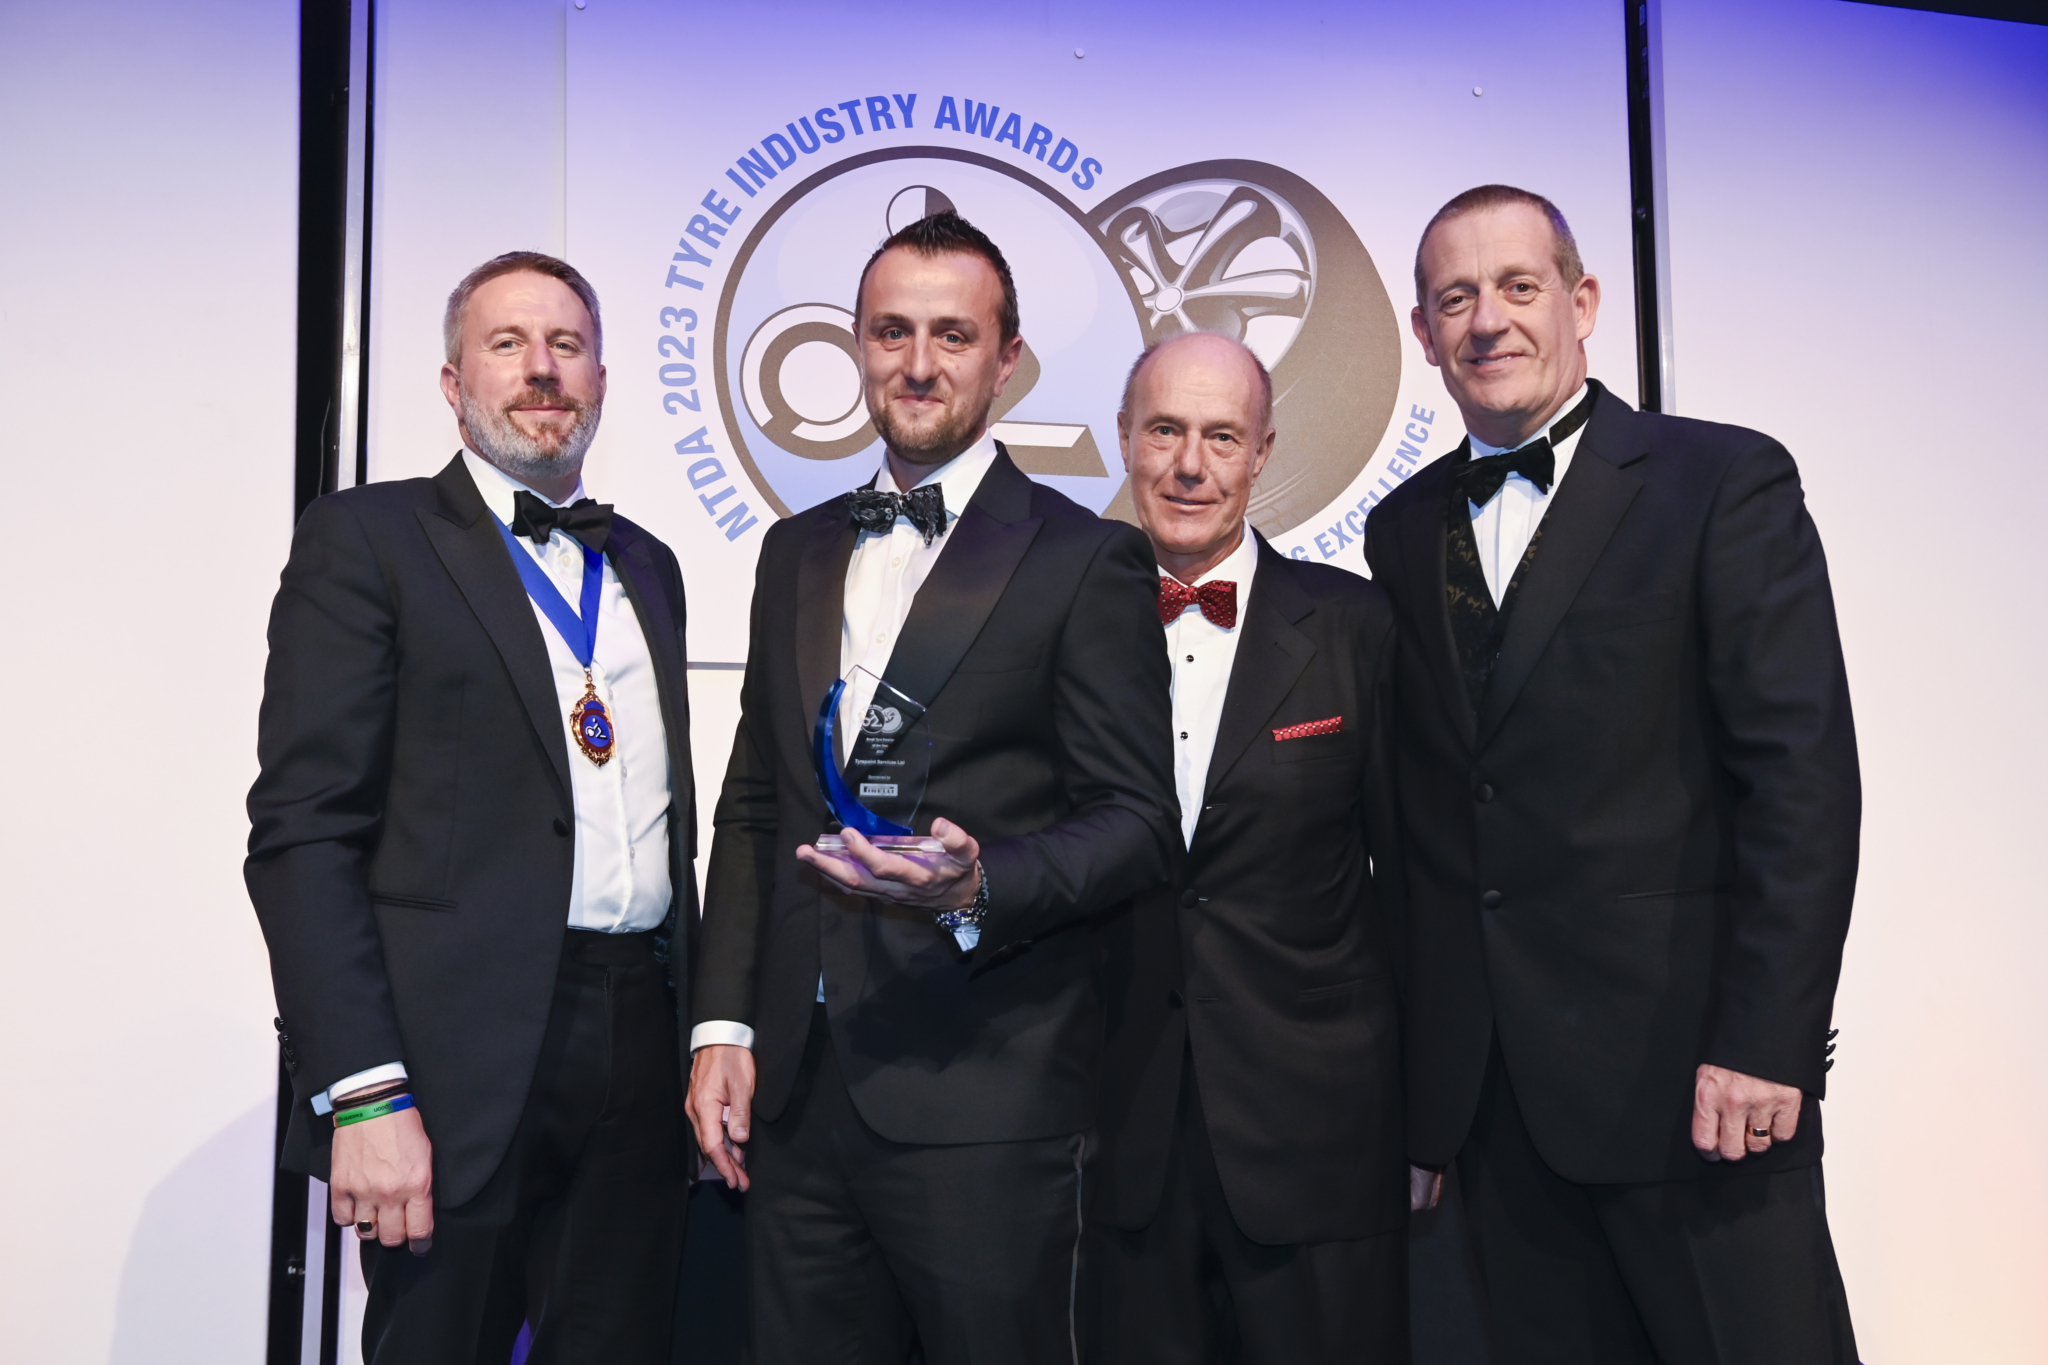 TyrePoint ‘Gobsmacked’ to win Tyre Retailer of the Year Award